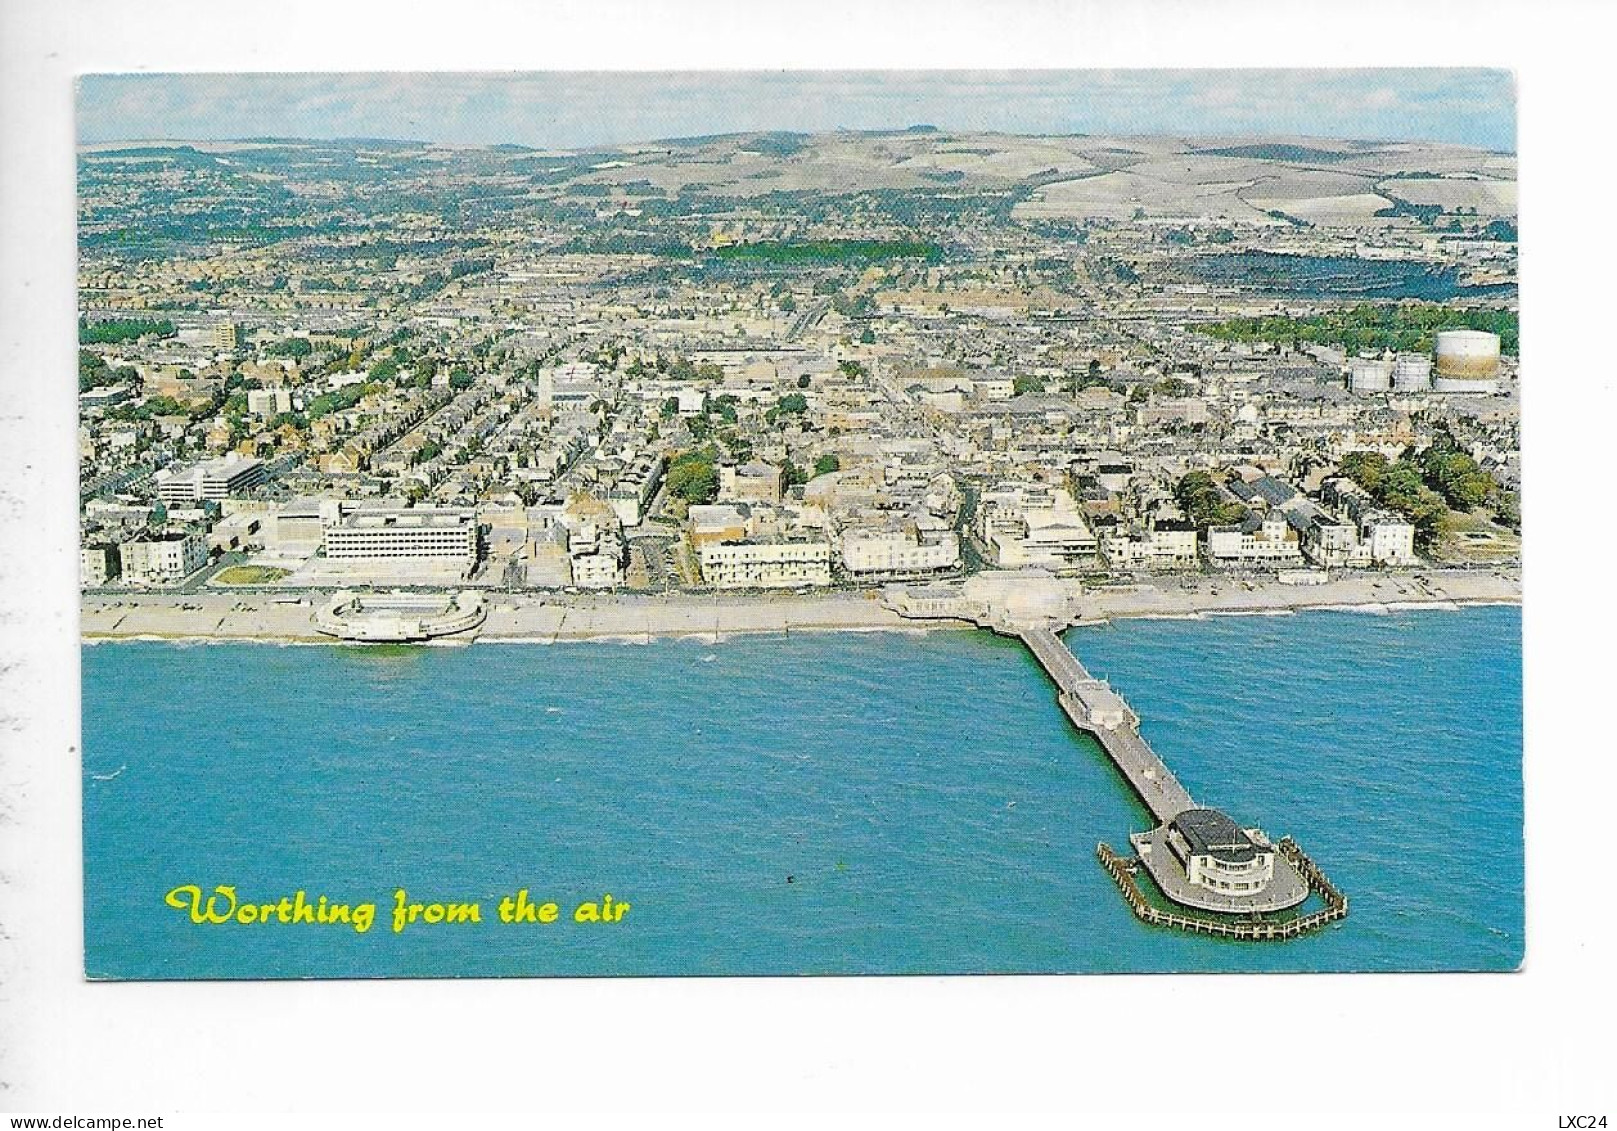 WORTHING FROM THE AIR. - Worthing